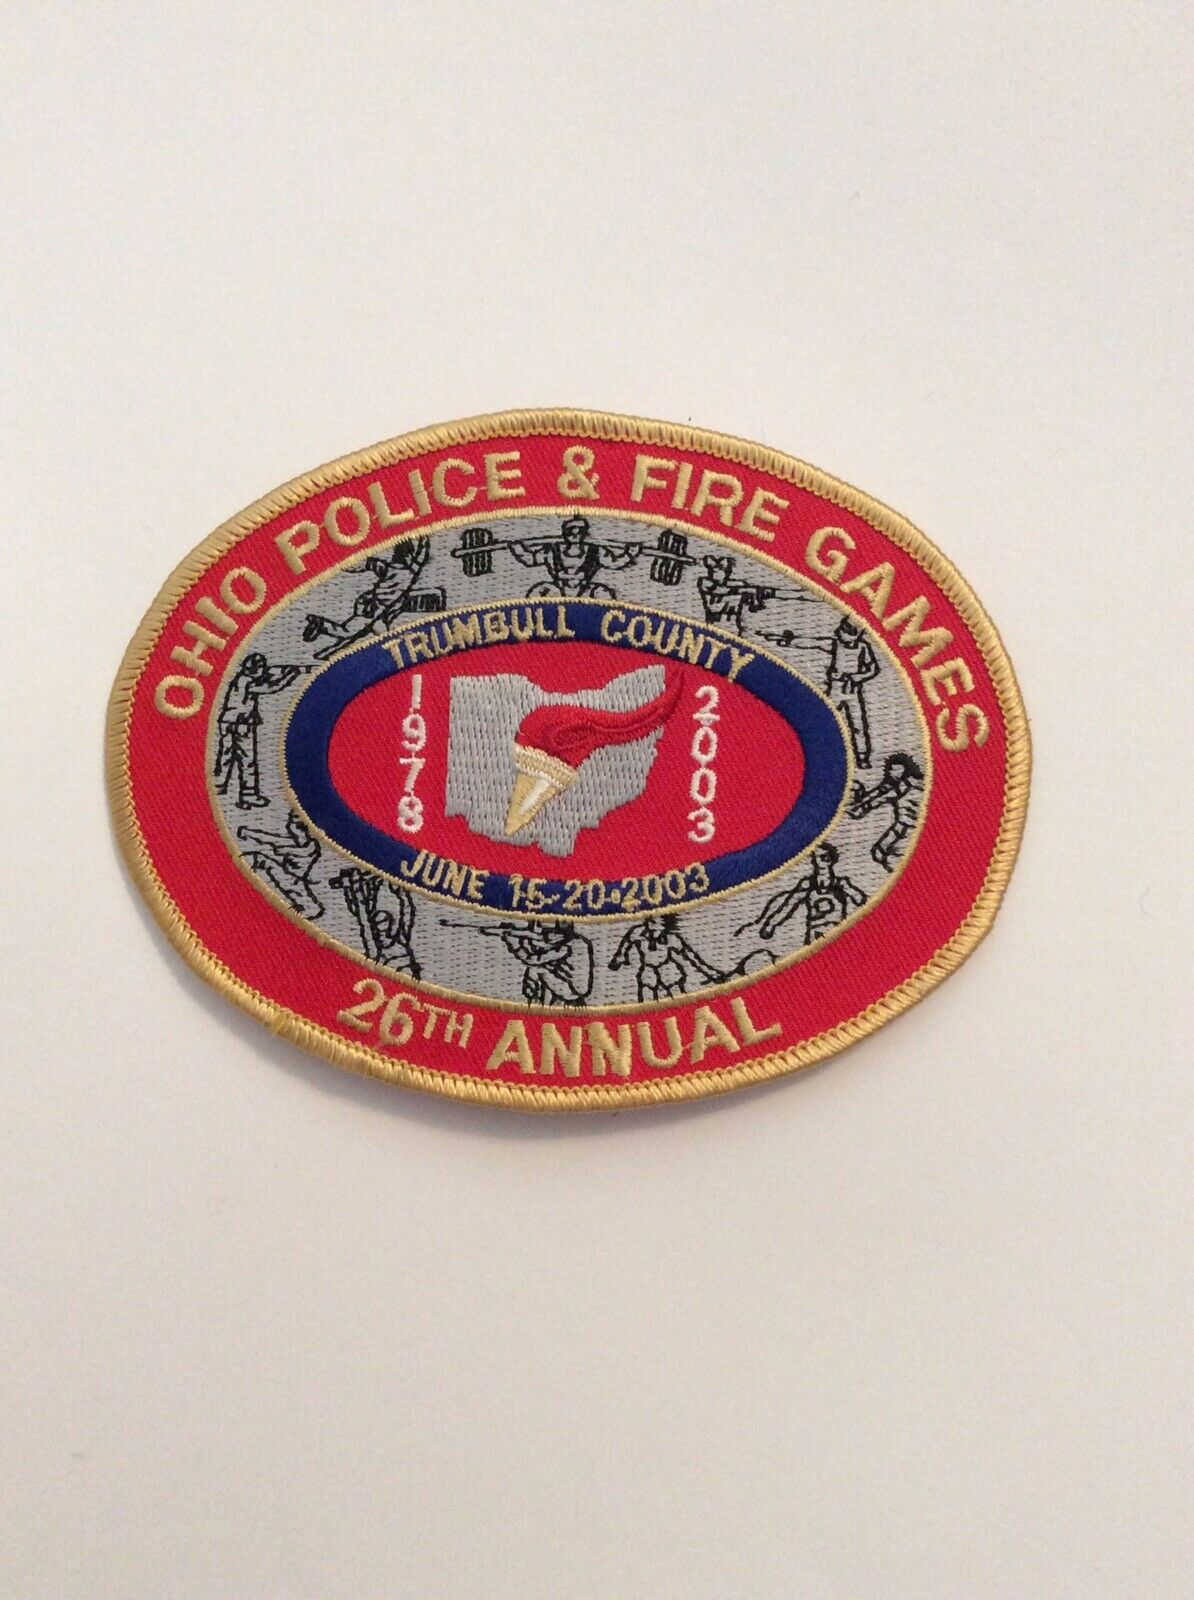 Ohio Police And Fire Games 26th Annual 2003 Patch